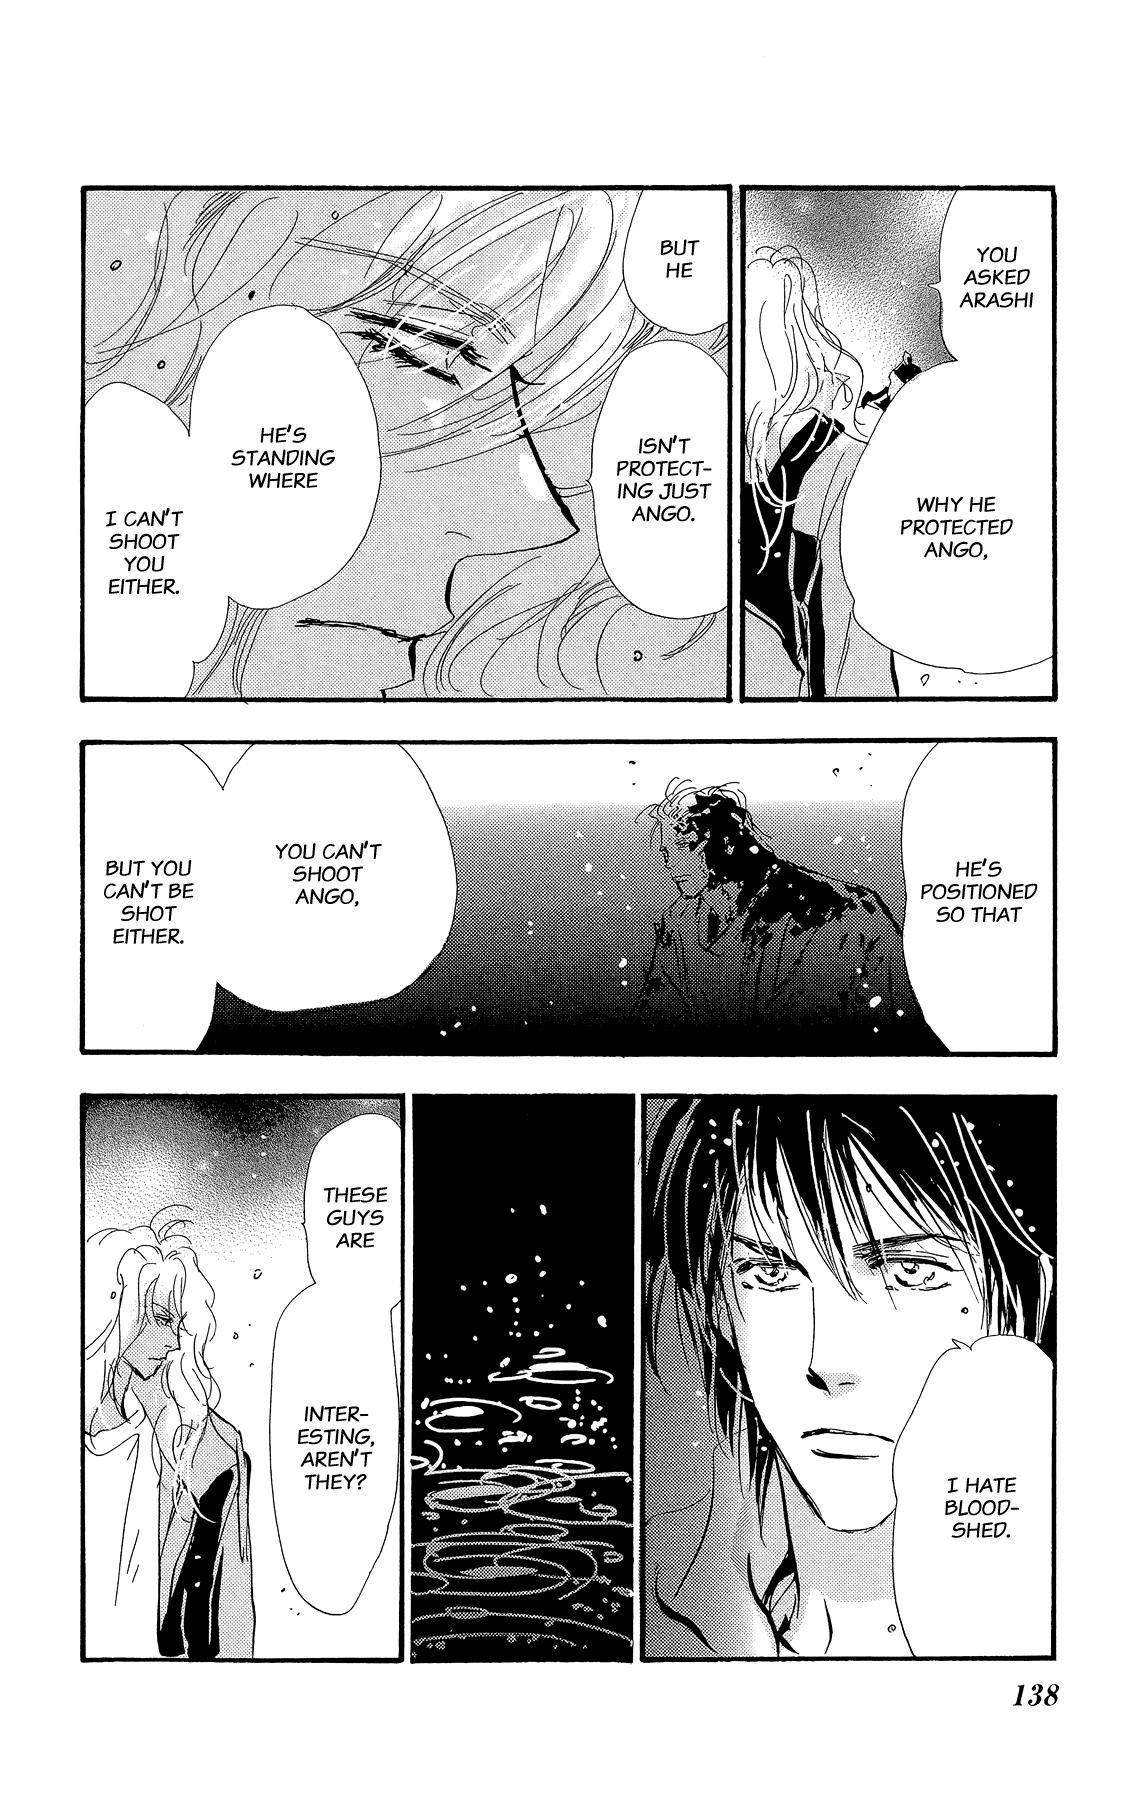 7 Seeds Vol. 31 Ch. 160 Mountains Chapter 25 [Judgment]